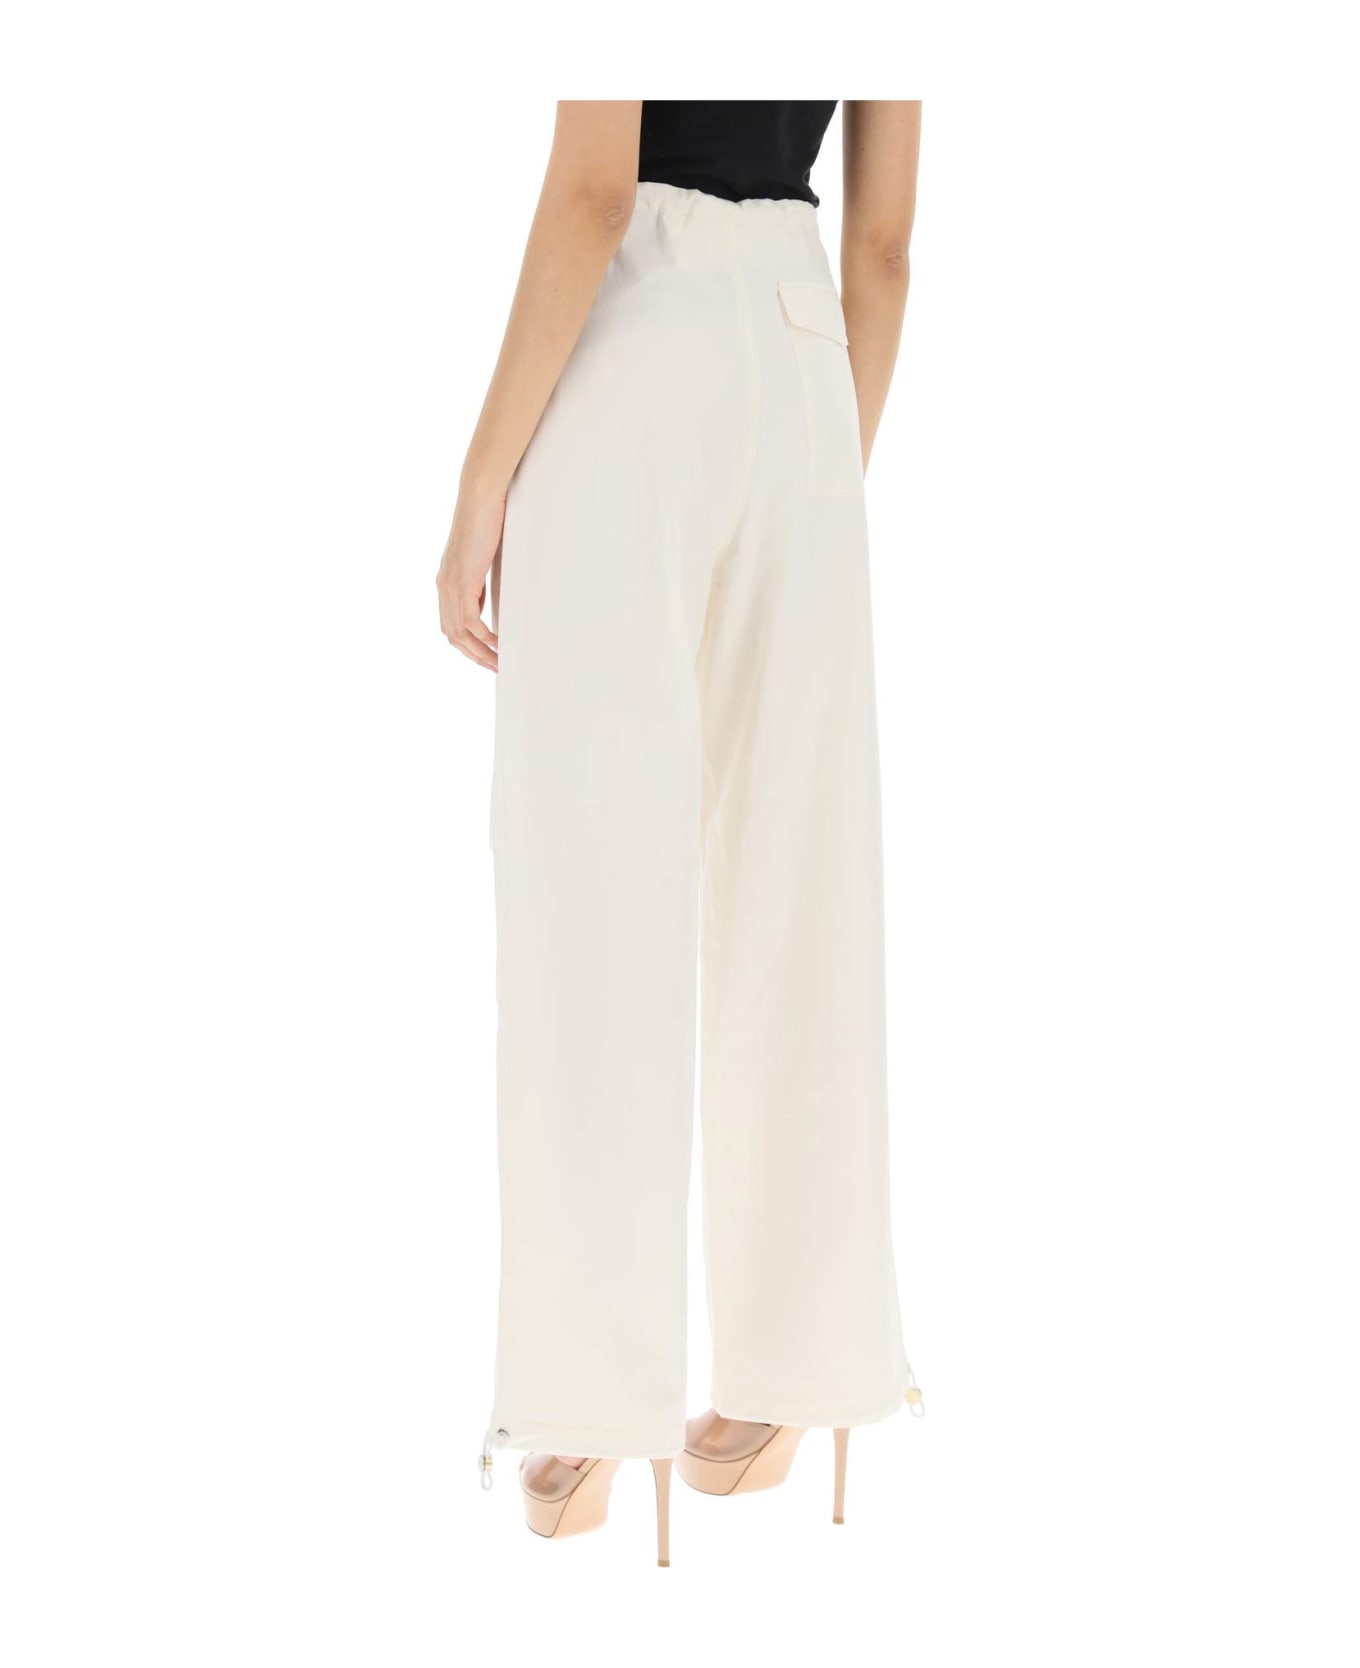 Dion Lee Parachute Pants - IVORY (White) ボトムス